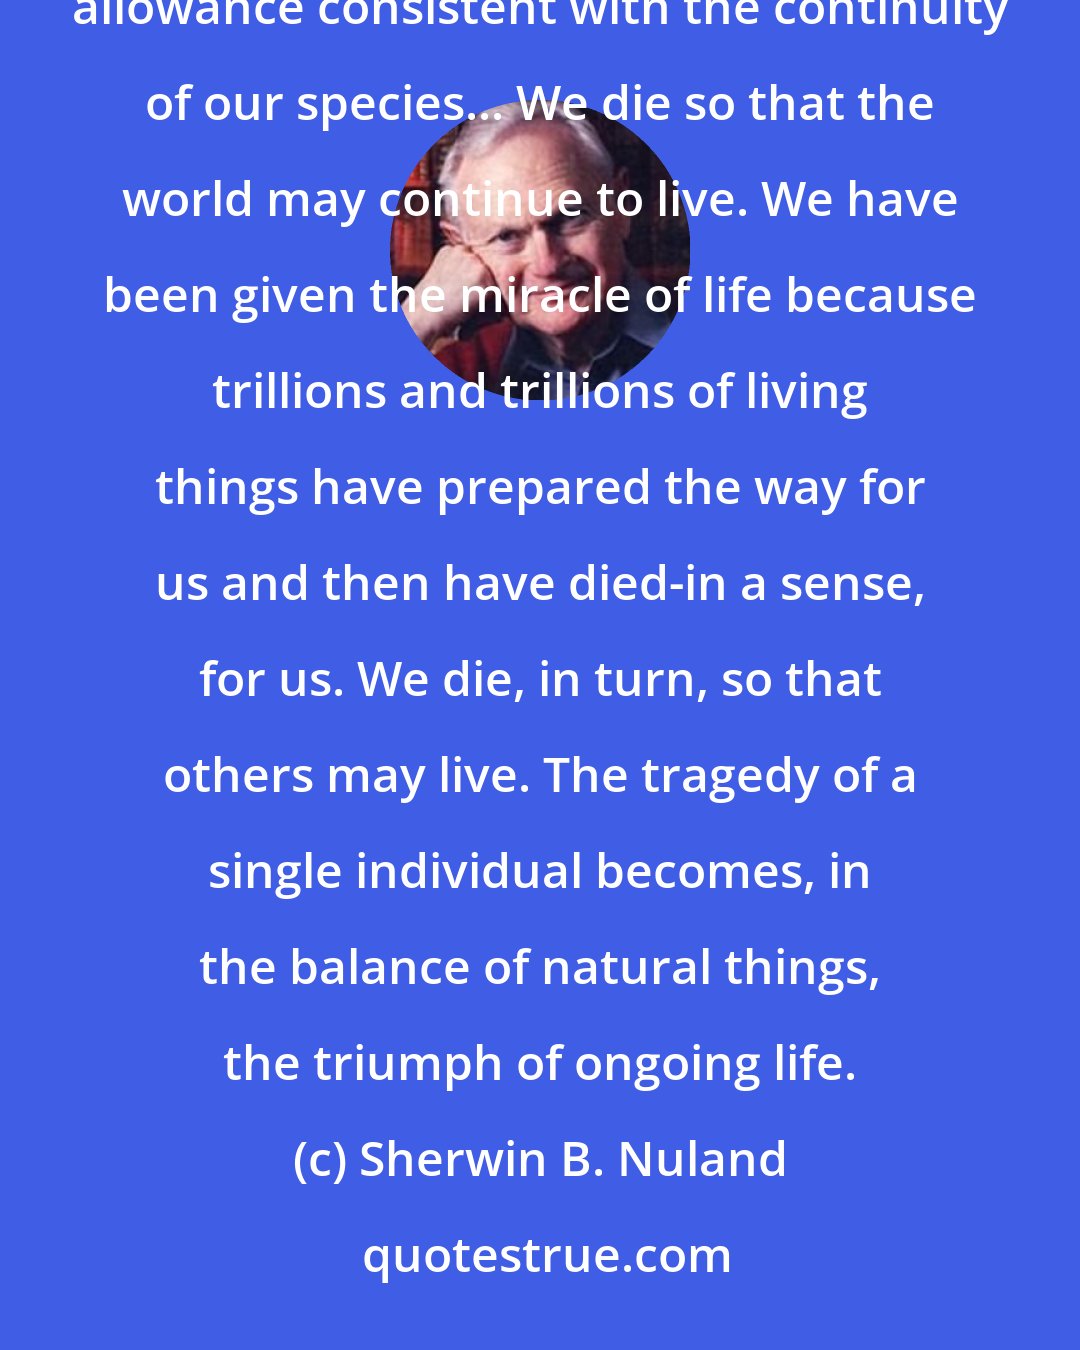 Sherwin B. Nuland: A realistic expectation also demands our acceptance that one's allotted time on earth must be limited to an allowance consistent with the continuity of our species... We die so that the world may continue to live. We have been given the miracle of life because trillions and trillions of living things have prepared the way for us and then have died-in a sense, for us. We die, in turn, so that others may live. The tragedy of a single individual becomes, in the balance of natural things, the triumph of ongoing life.